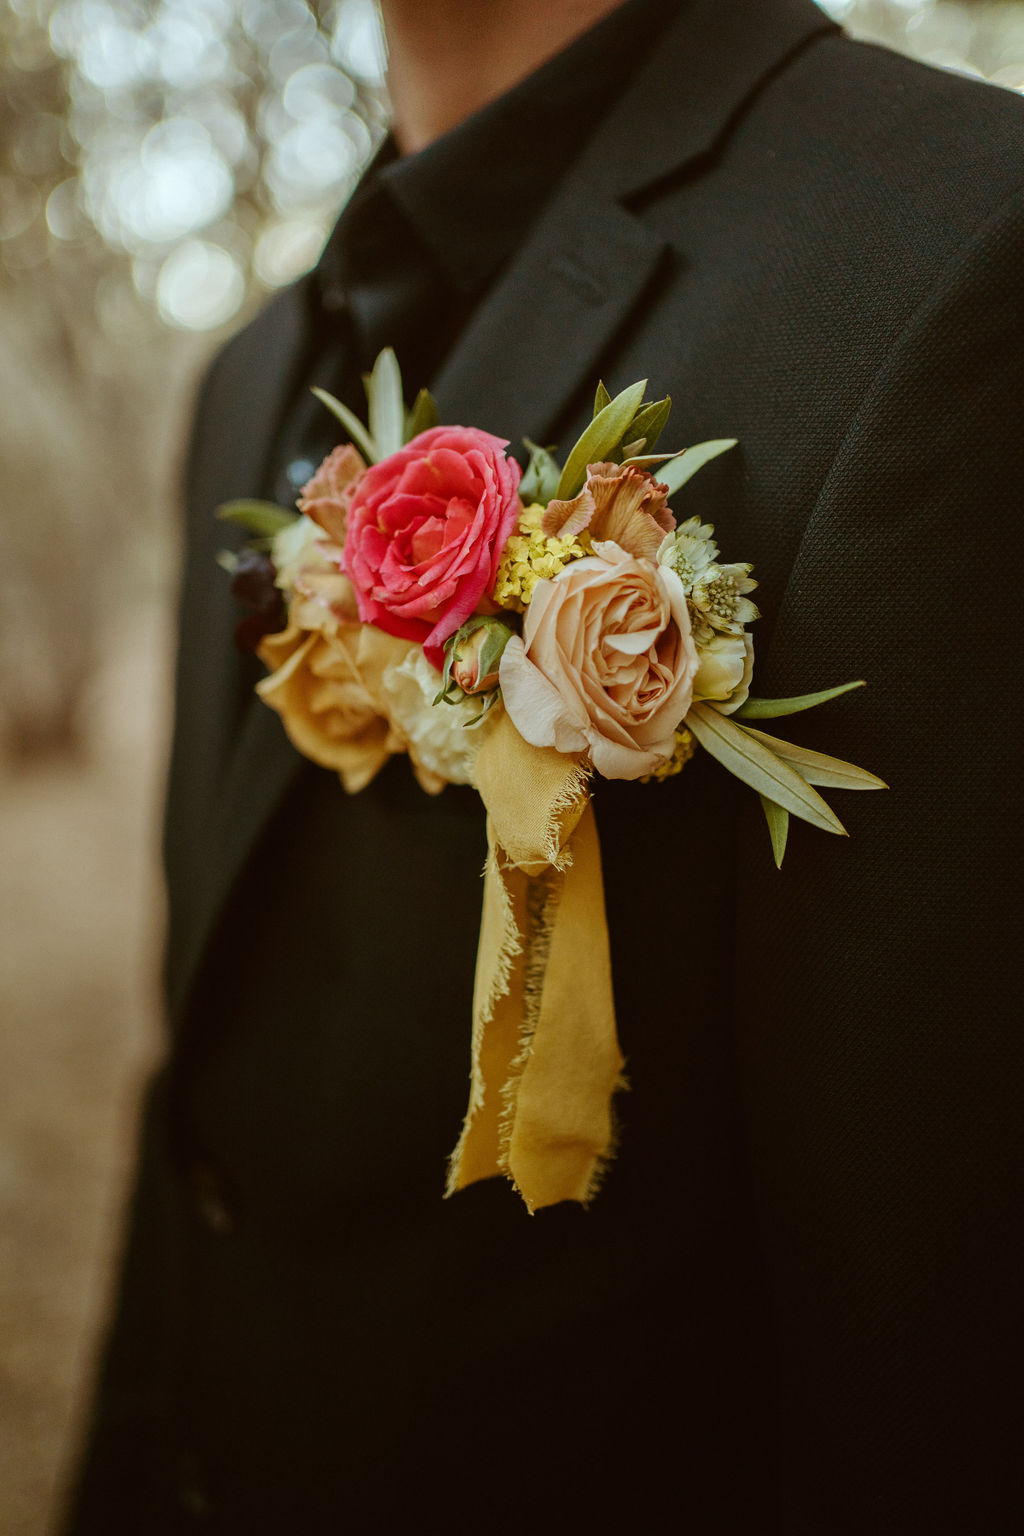 Groom's Boutonniere on all Black Suit in Olive Grove for GreenGale Farms Hawaiian Elopement 